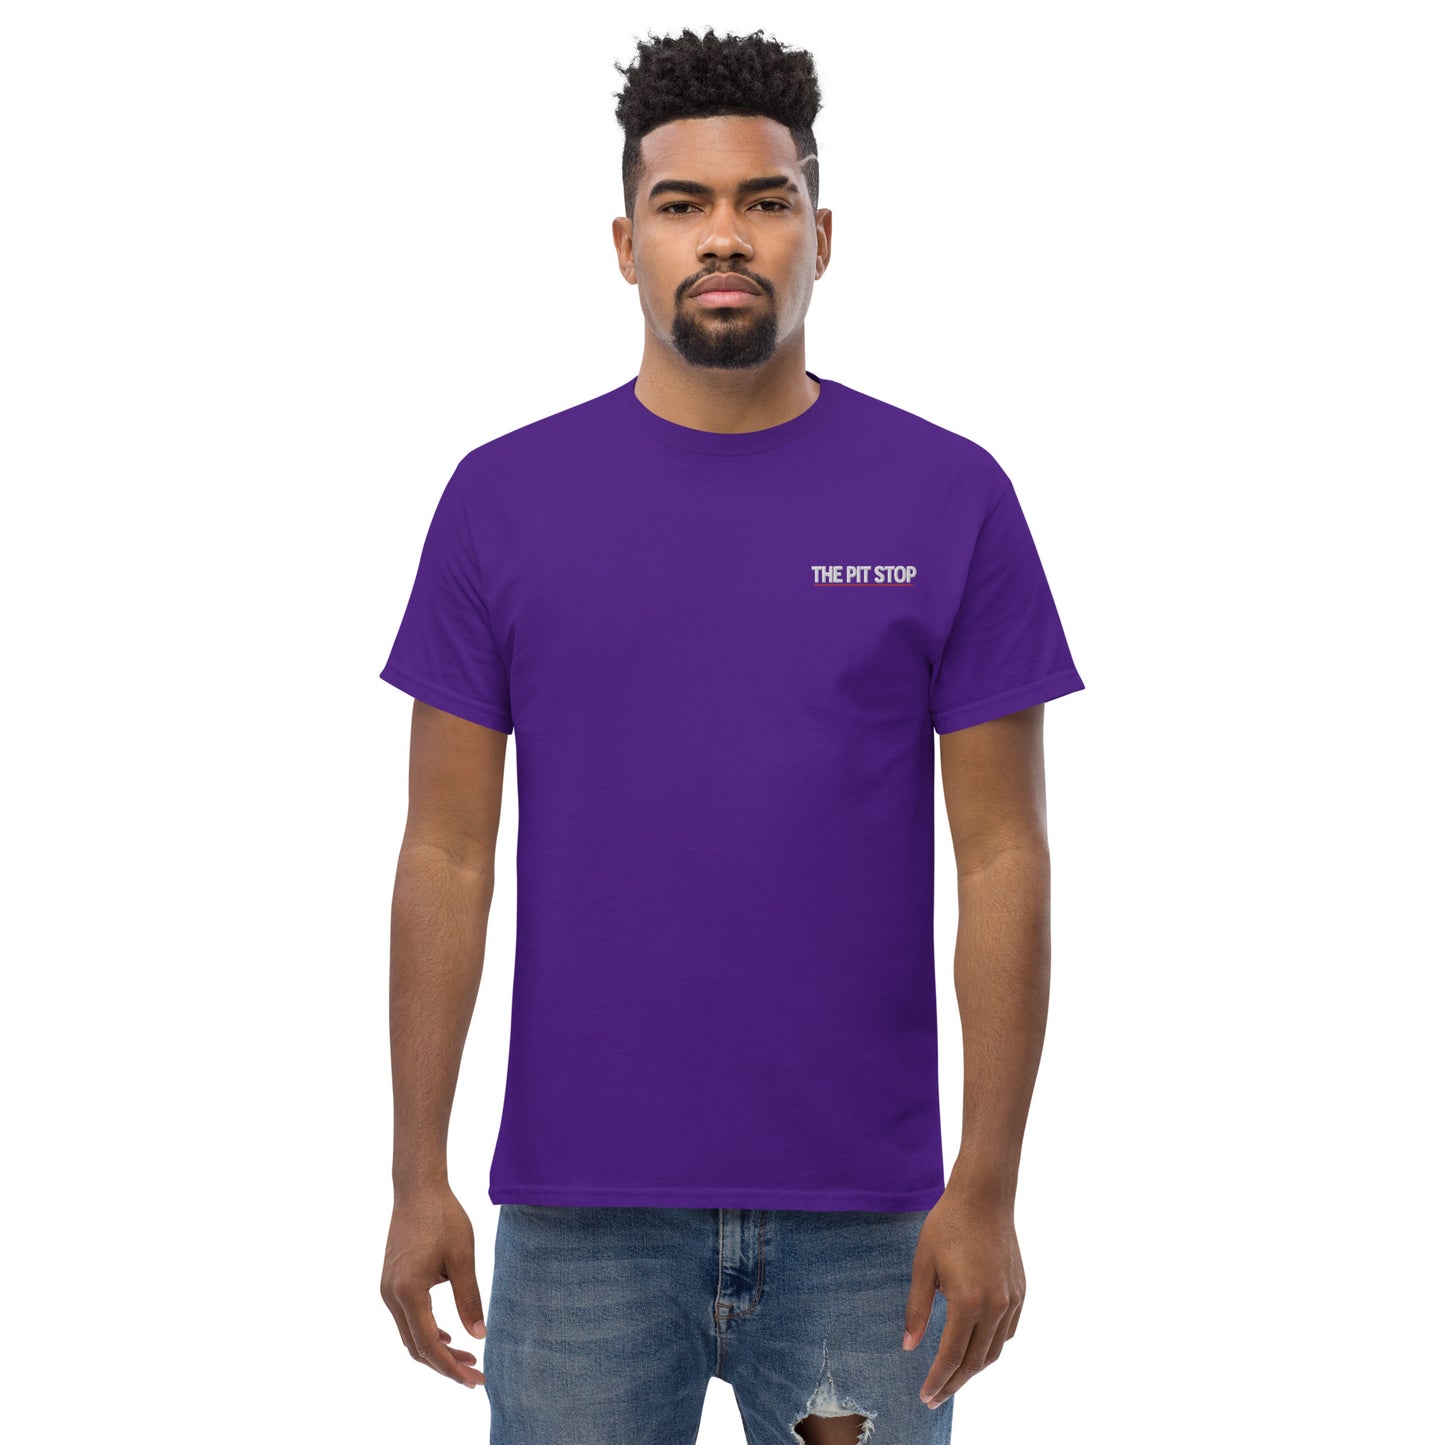 The Pit Stop T-Shirt